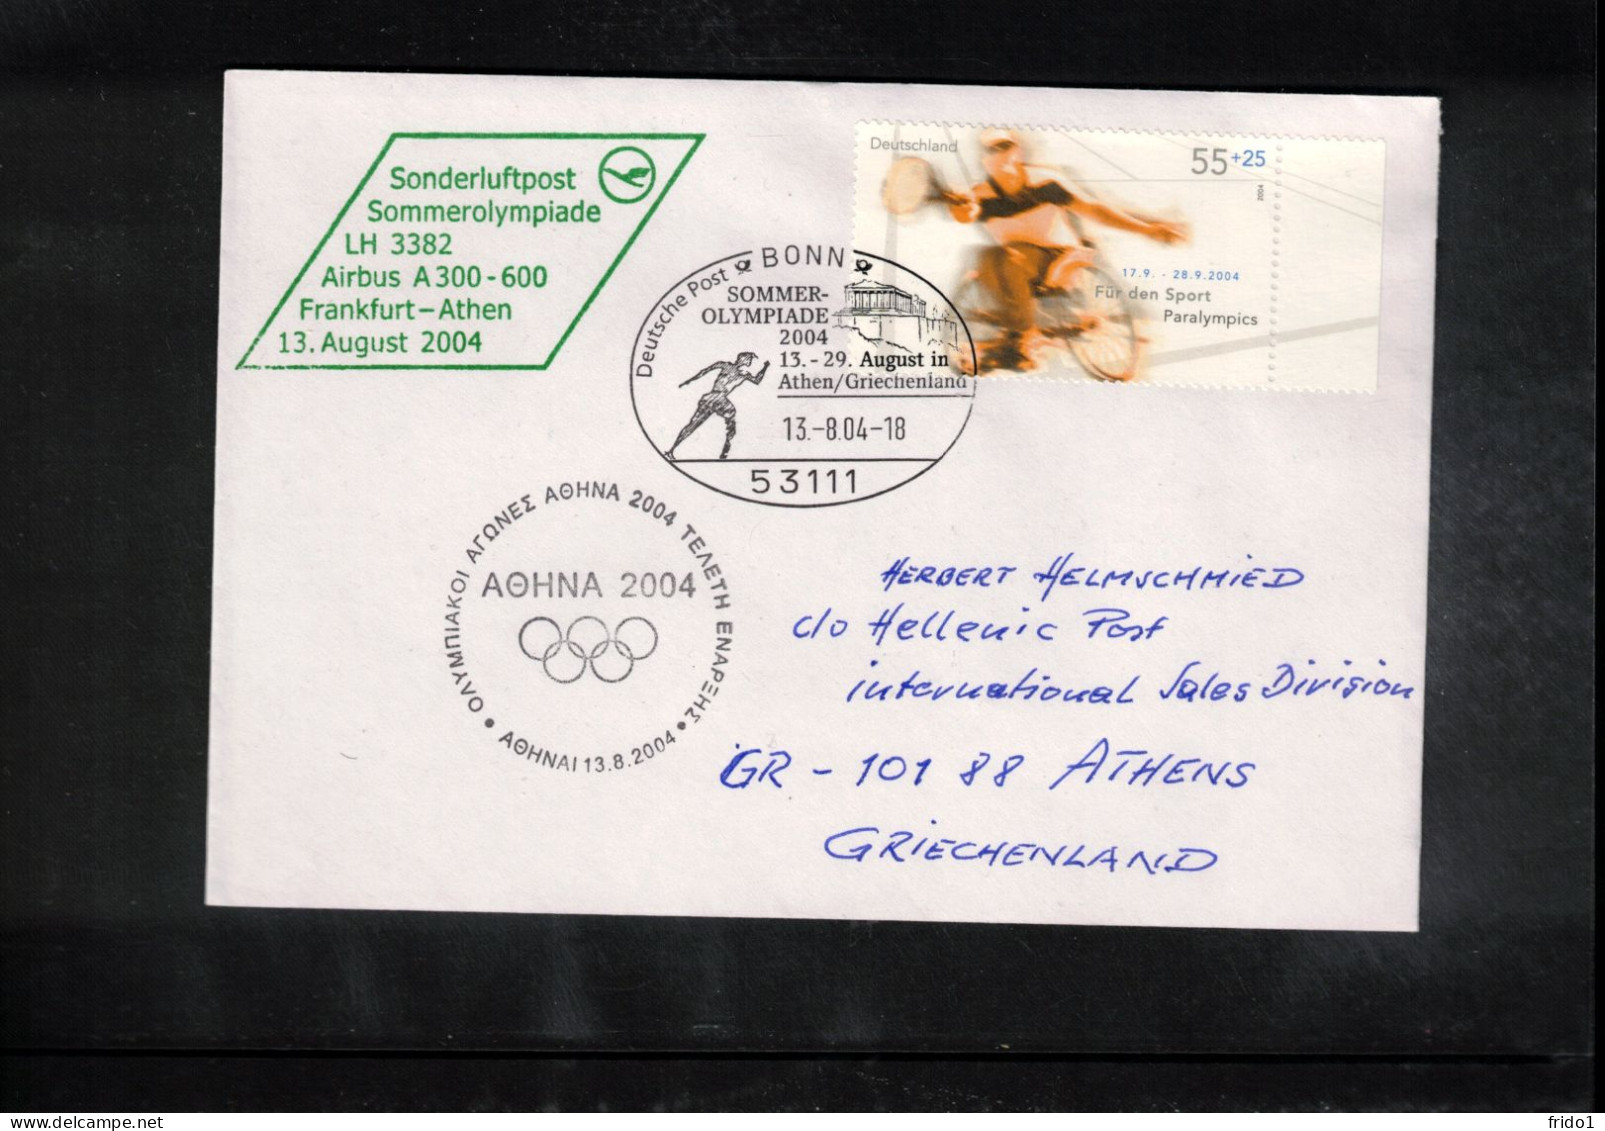 Germany 2004 Olympic Games Athens - Special Lufthansa Flight Frankfurt - Athens Interesting Cover - Sommer 2004: Athen